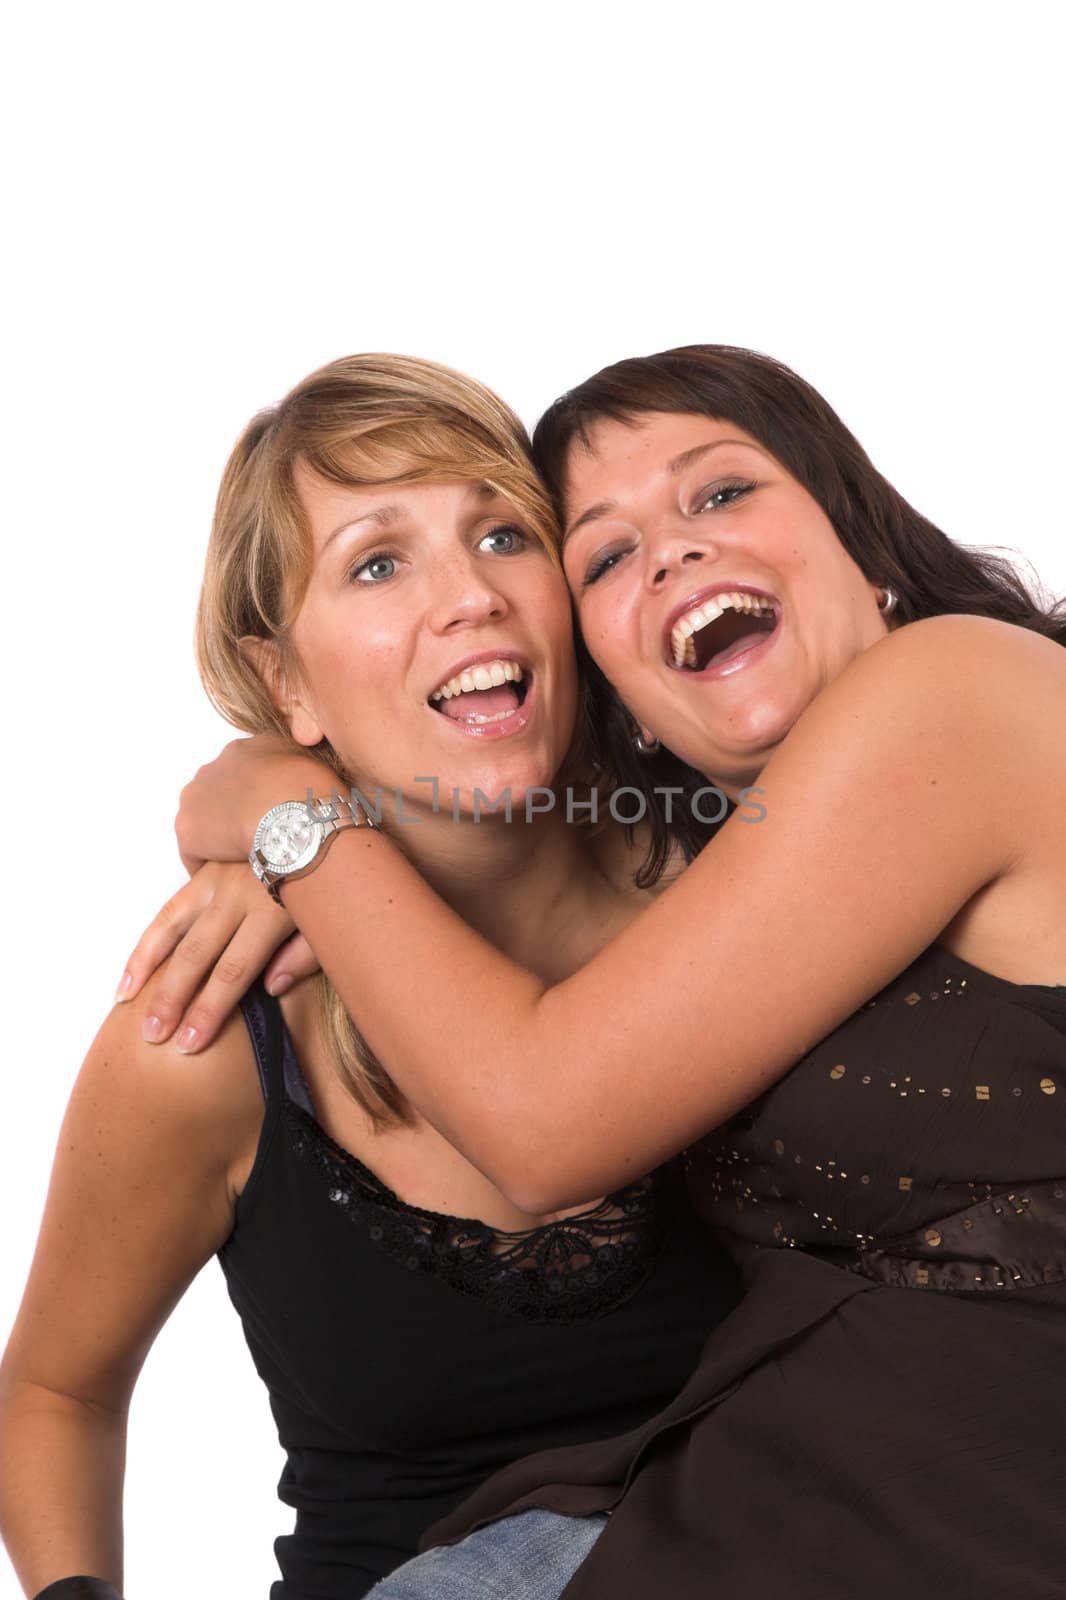 Two sisters having fun together, laughing out loud